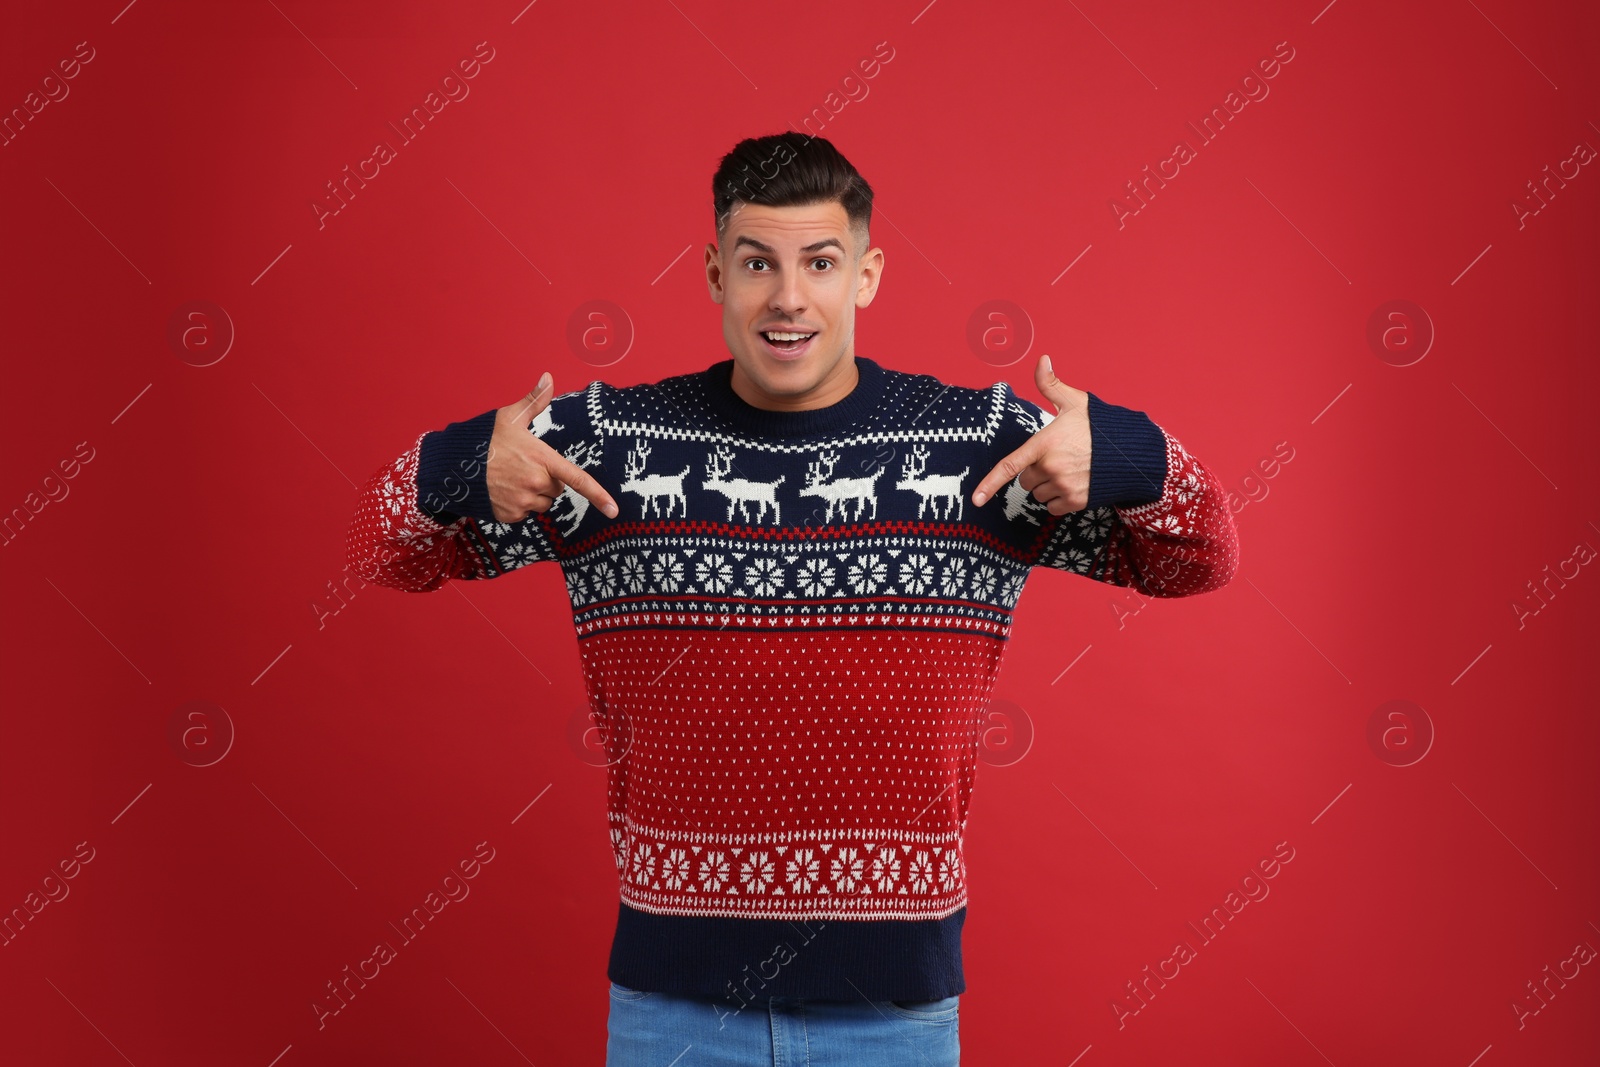 Photo of Handsome man pointing on his Christmas sweater against red background